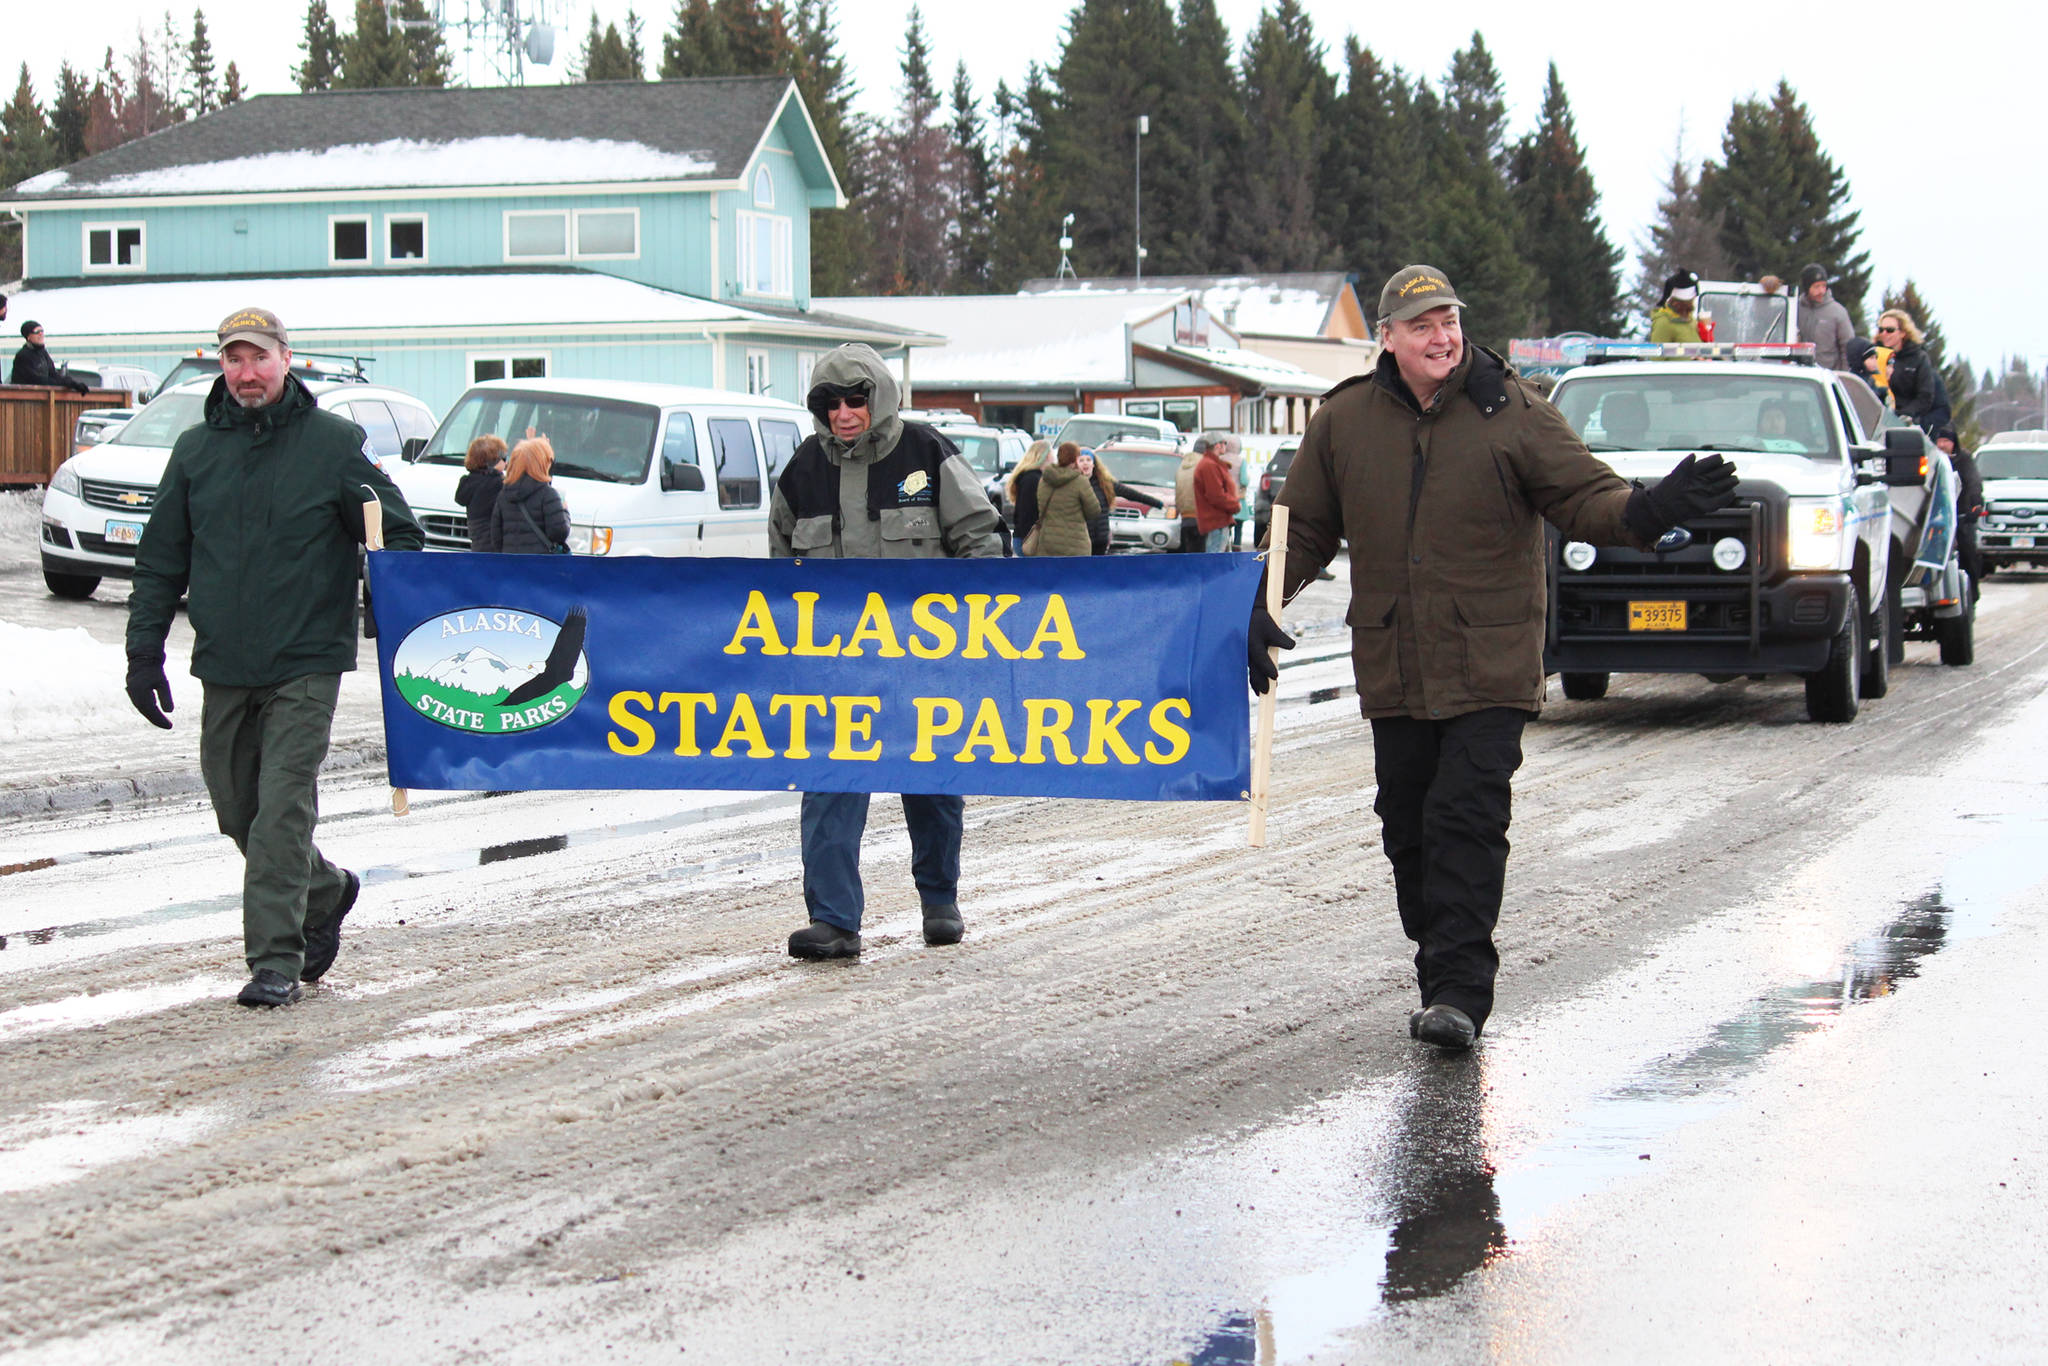 Representatives from the Alaska State Parks march in this year’s Homer Winter Carnival Parade on Saturday, Jan. 8, 2020 on Pioneer Avenue in Homer, Alaska. This year’s theme was a tribute to the 50th anniversary of Kachemak Bay State Park. (Photo by Megan Pacer/Homer News)